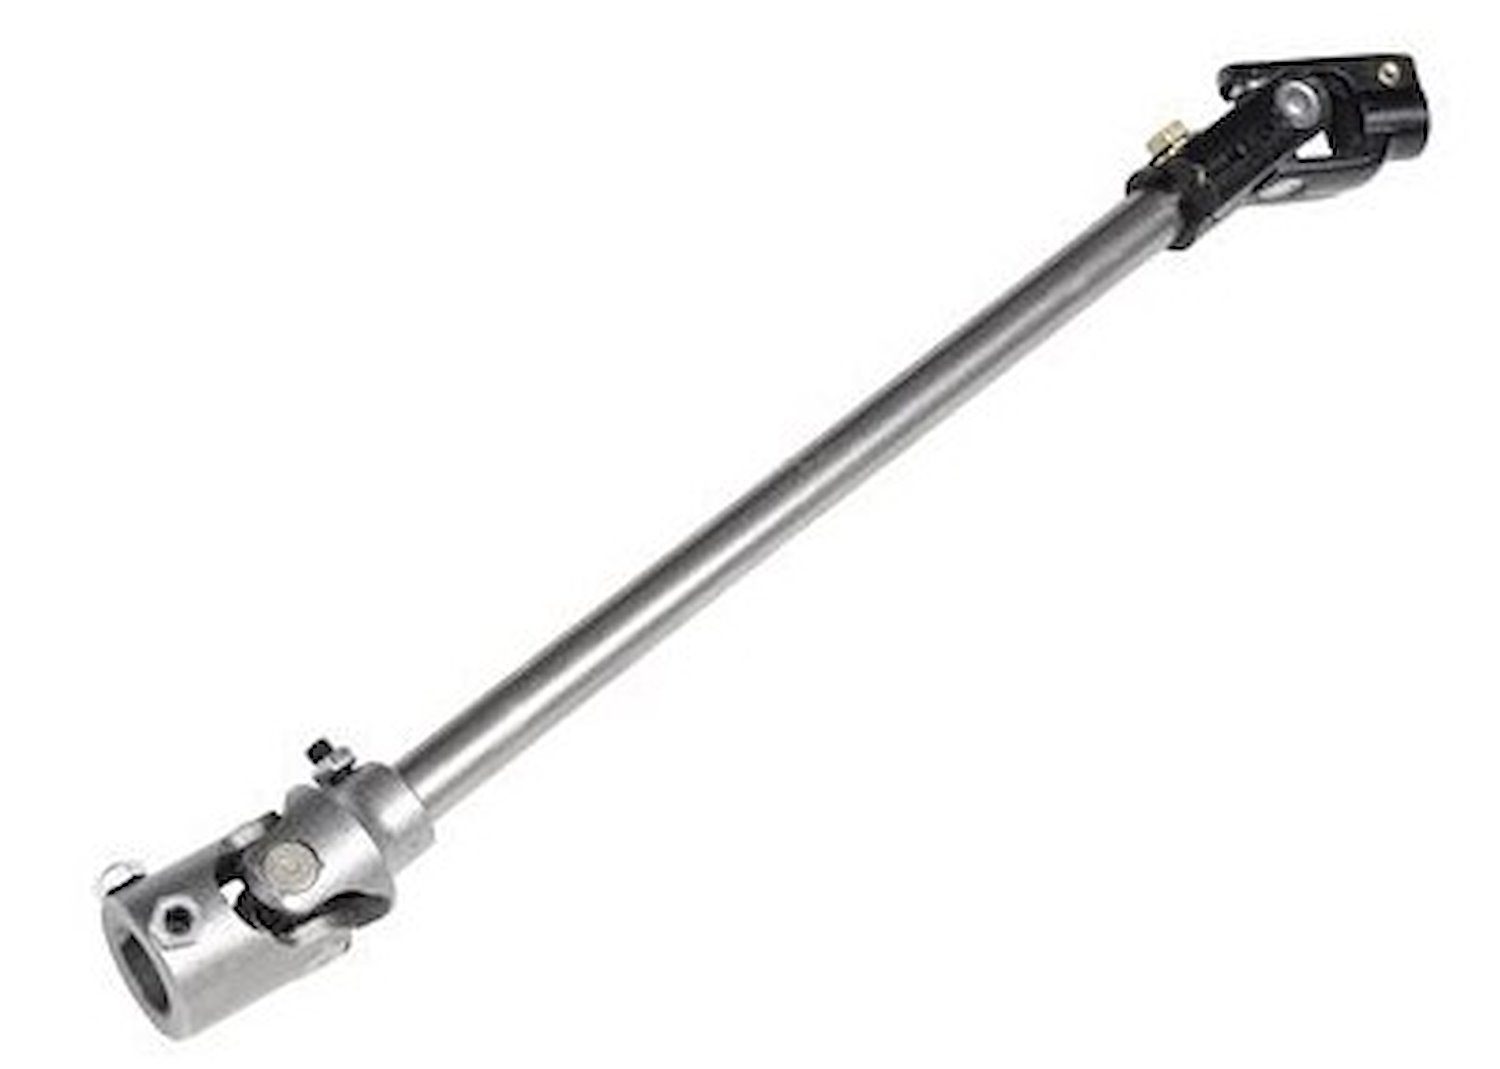 Steering Shaft for 1973-1978 Chevy C10, GMC C15